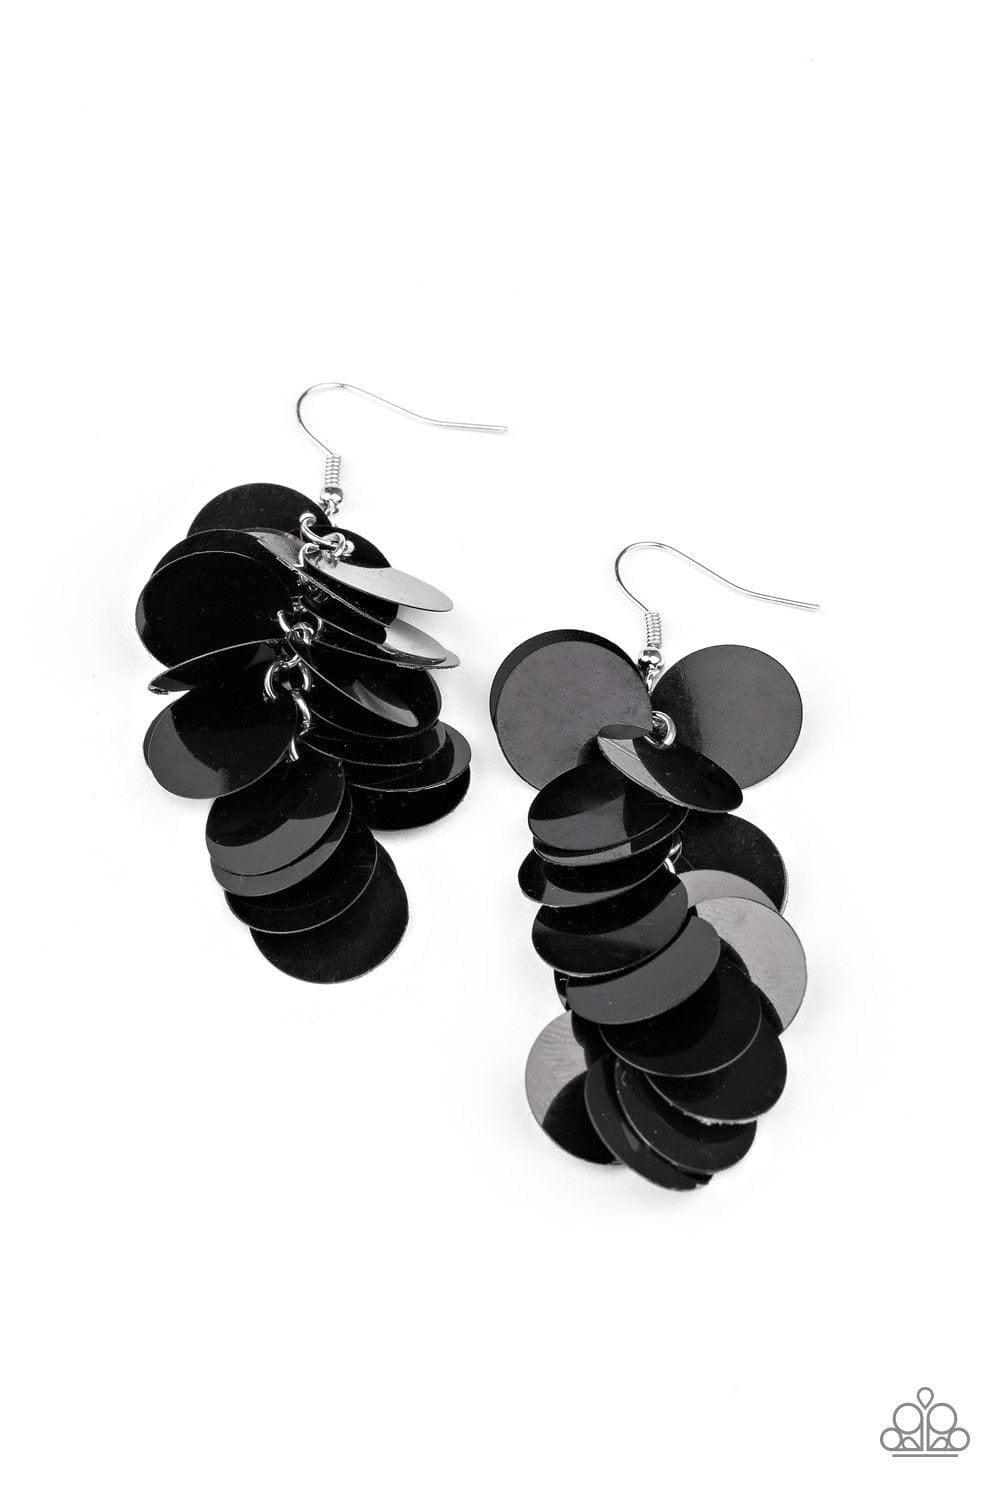 Paparazzi Accessories - Now You Sequin It - Black Earrings - Bling by JessieK